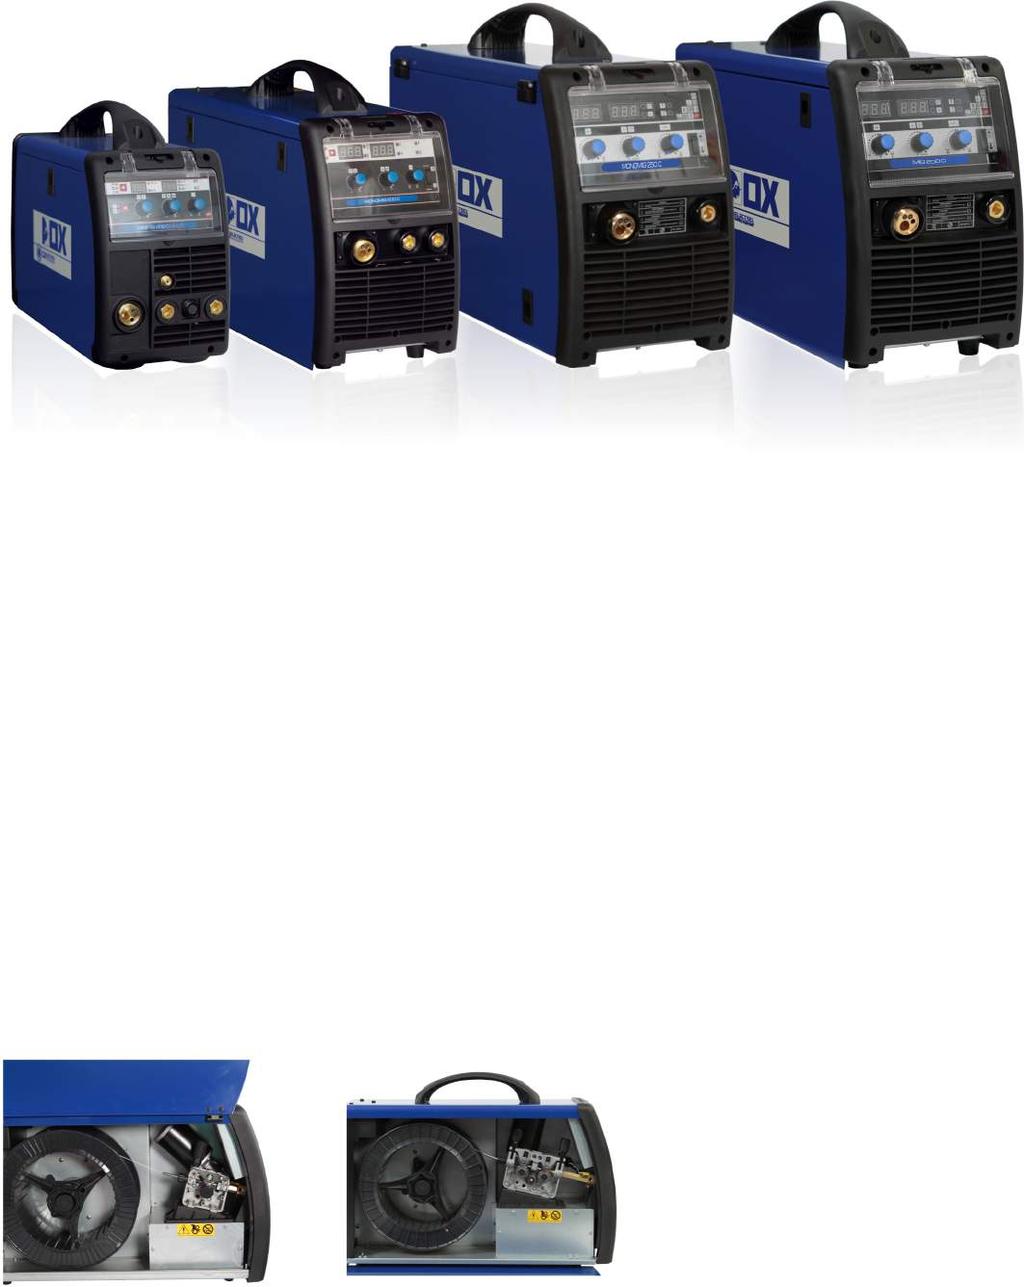 MIG / MG Compact MM LIFTIG MIG/MG COMPCT MINIMIG 200 C MULTI MONOMIG 200 C MONOMIG 250 C MIG 250 C MIG 320 C MIG/MG welding inverter machines, with integrated wire feeder.